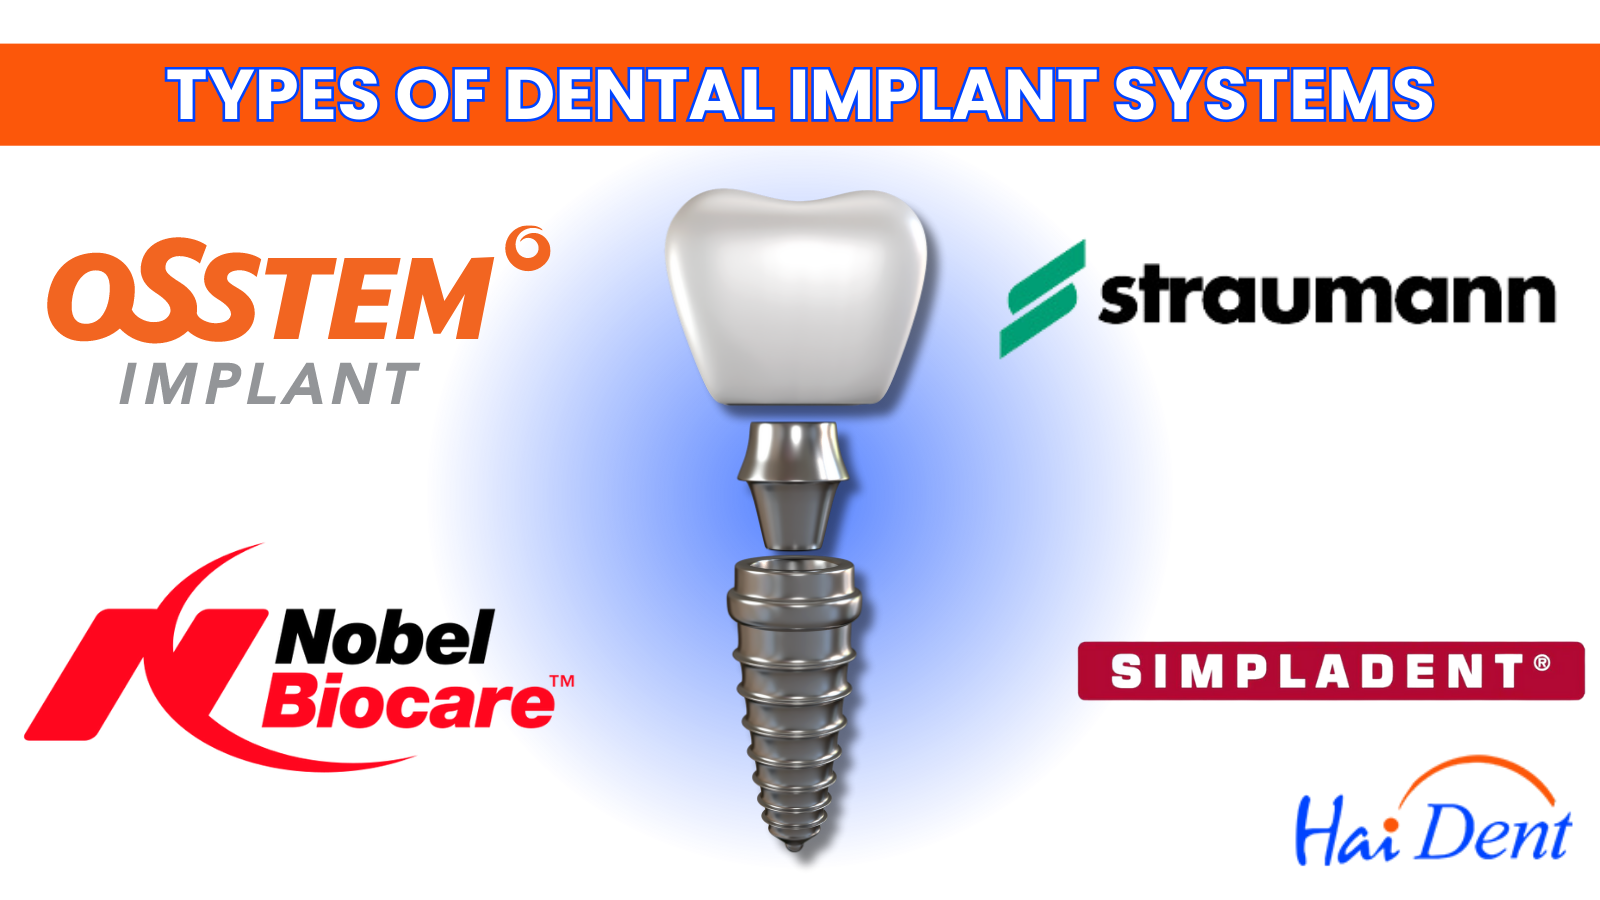 All-on-4 Dental Implants In India